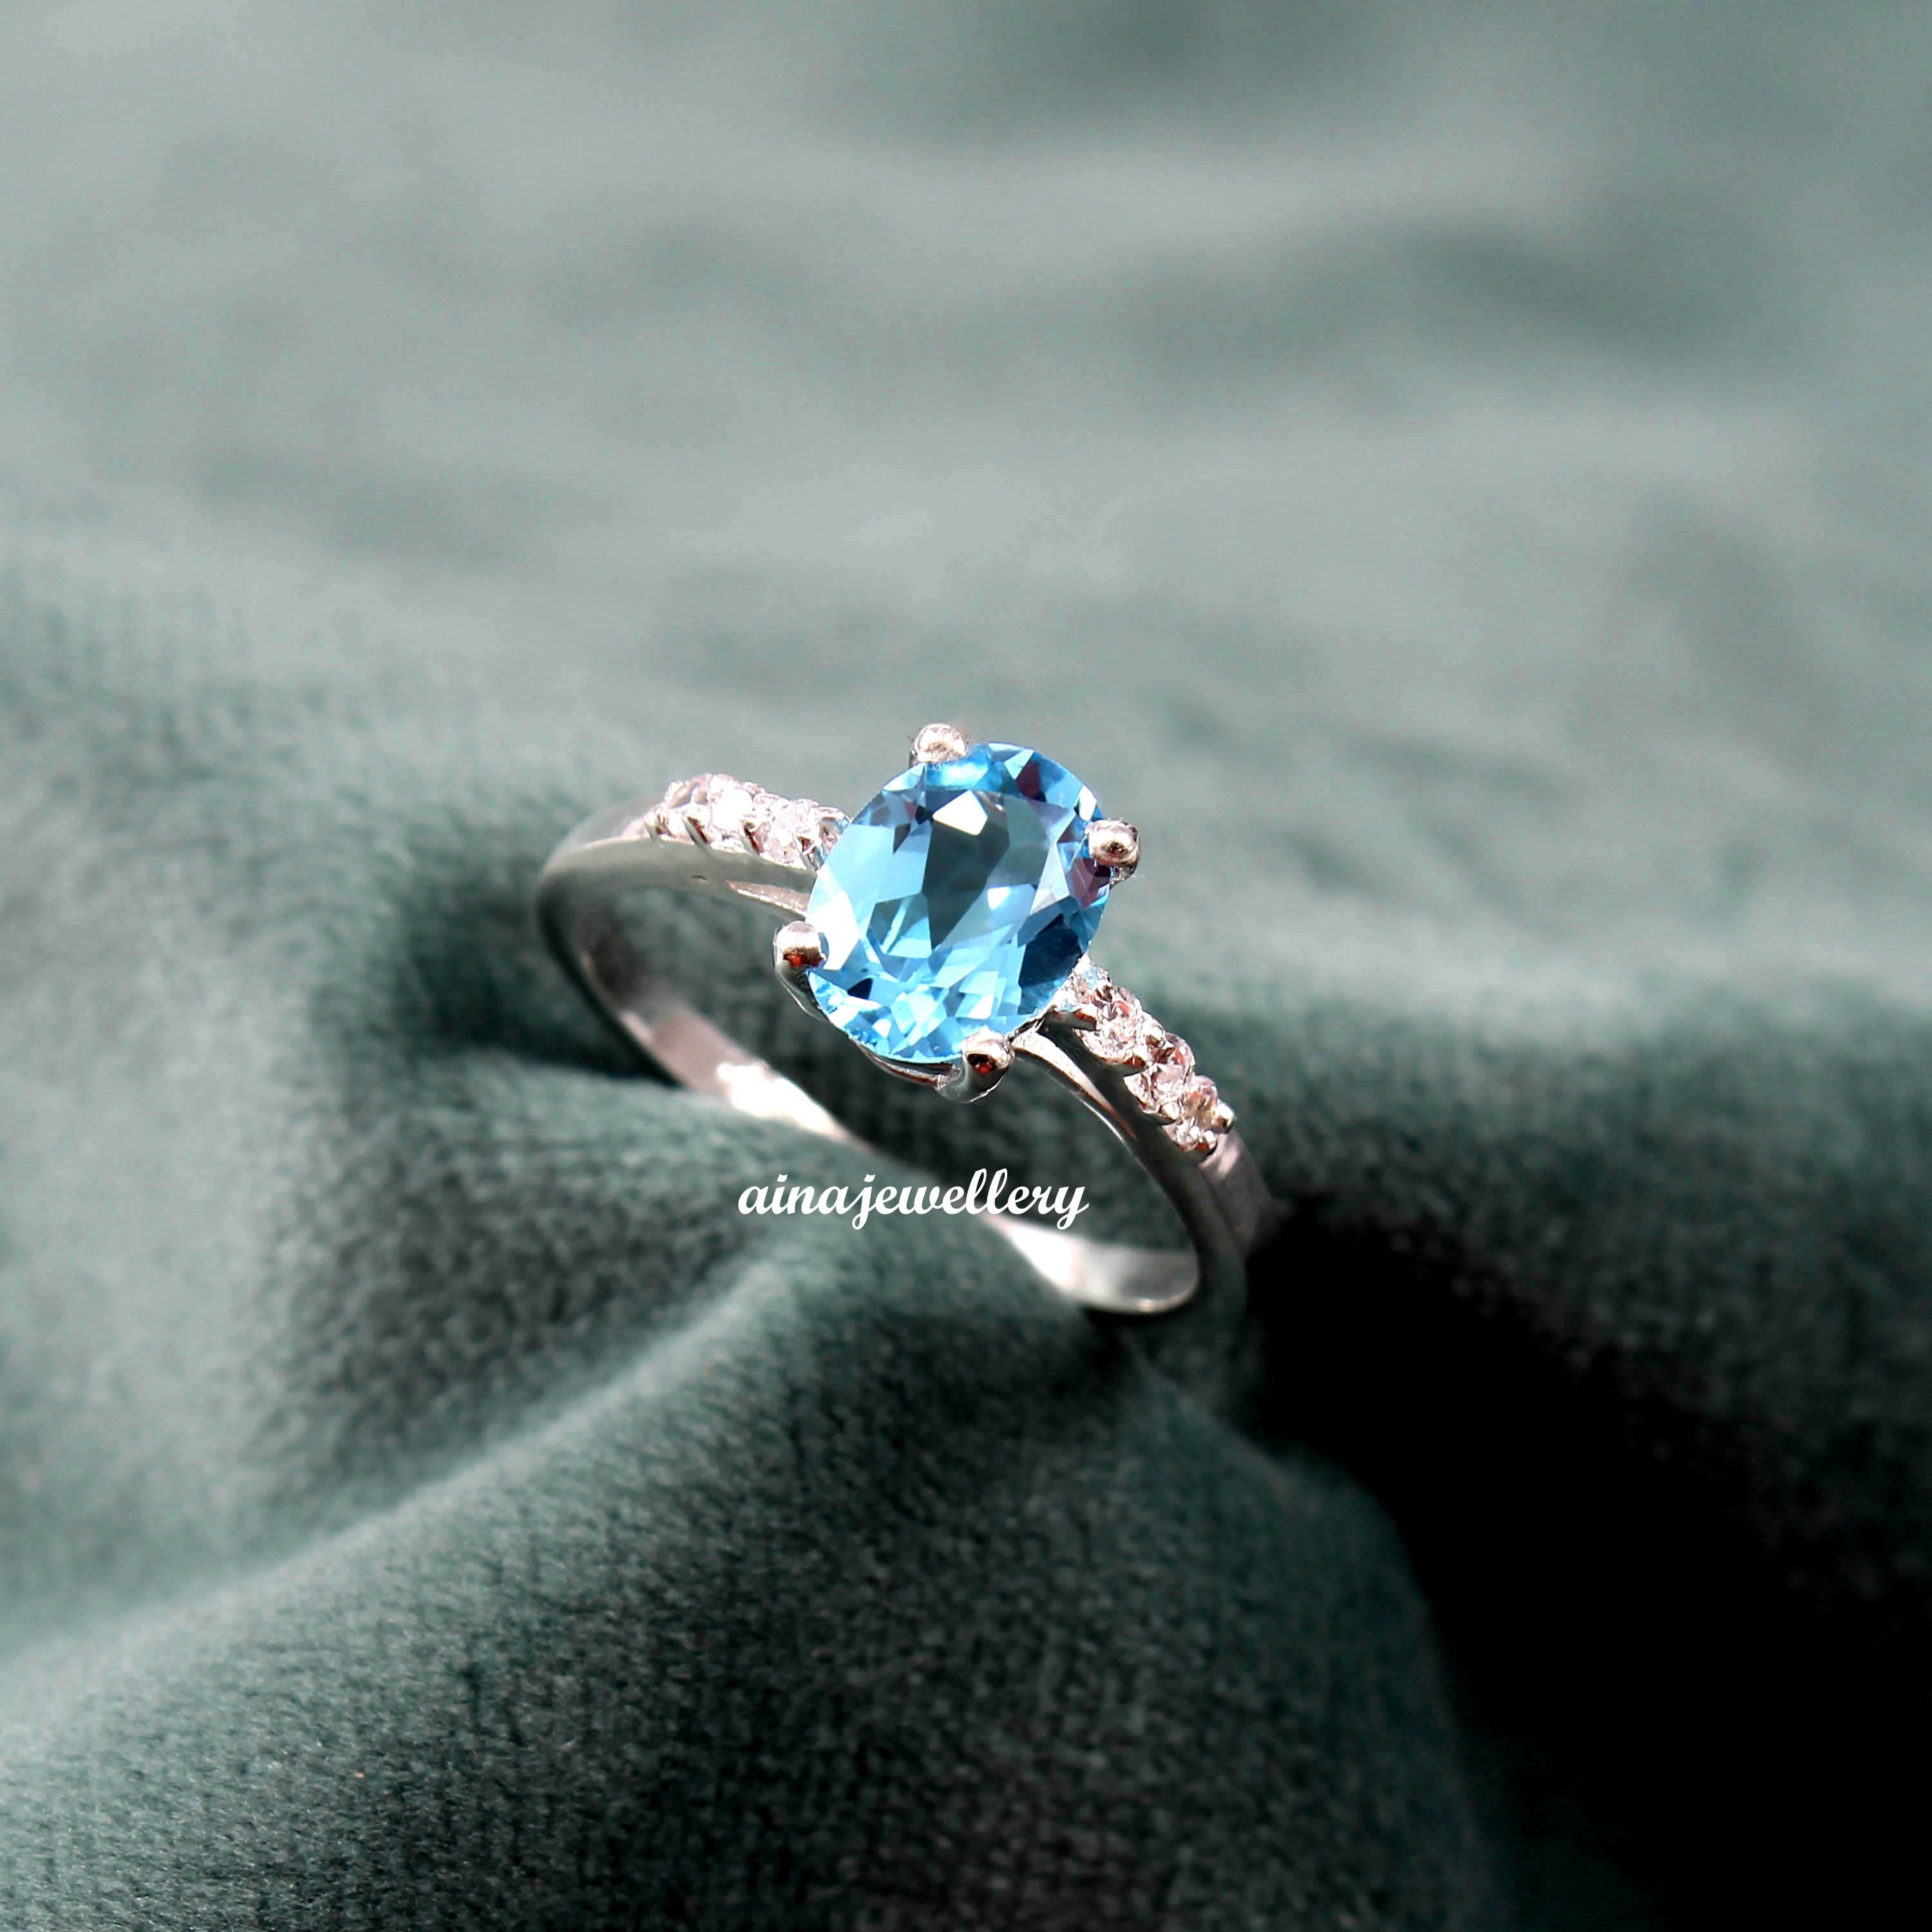 Swiss Blue Topaz Ring, 925 Sterling Silver Solitaire Ring, December  Birthstone Gift Ring, Engagement Ring, Wedding Ring, Blue Topaz Jewelry,  Nickel